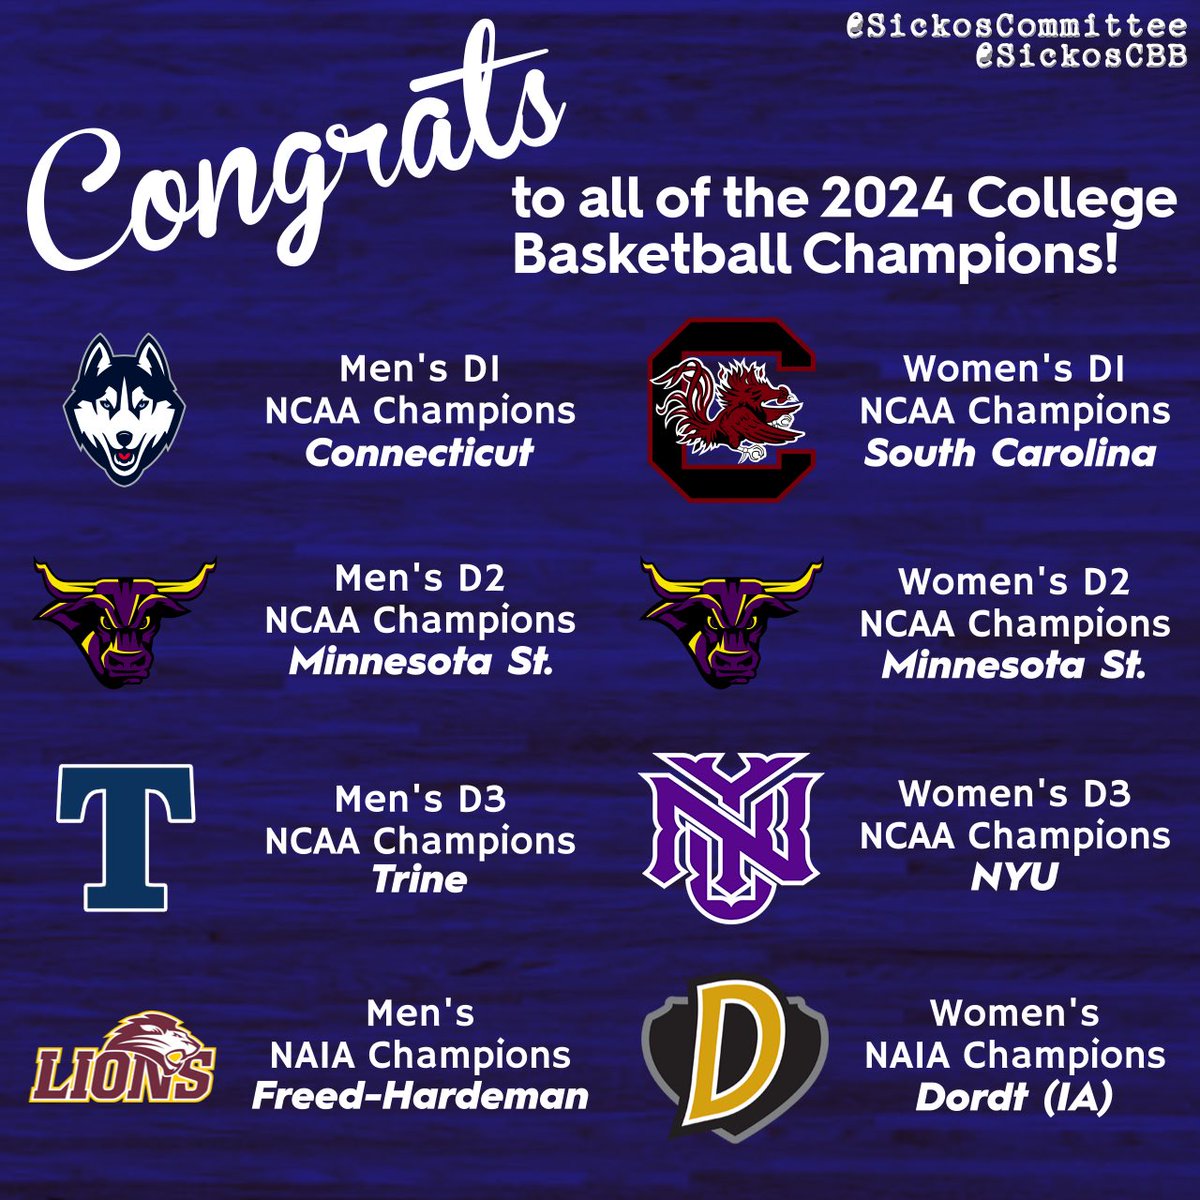 Congrats to the UConn Huskies and every other collegiate basketball champion we could find! 1/4